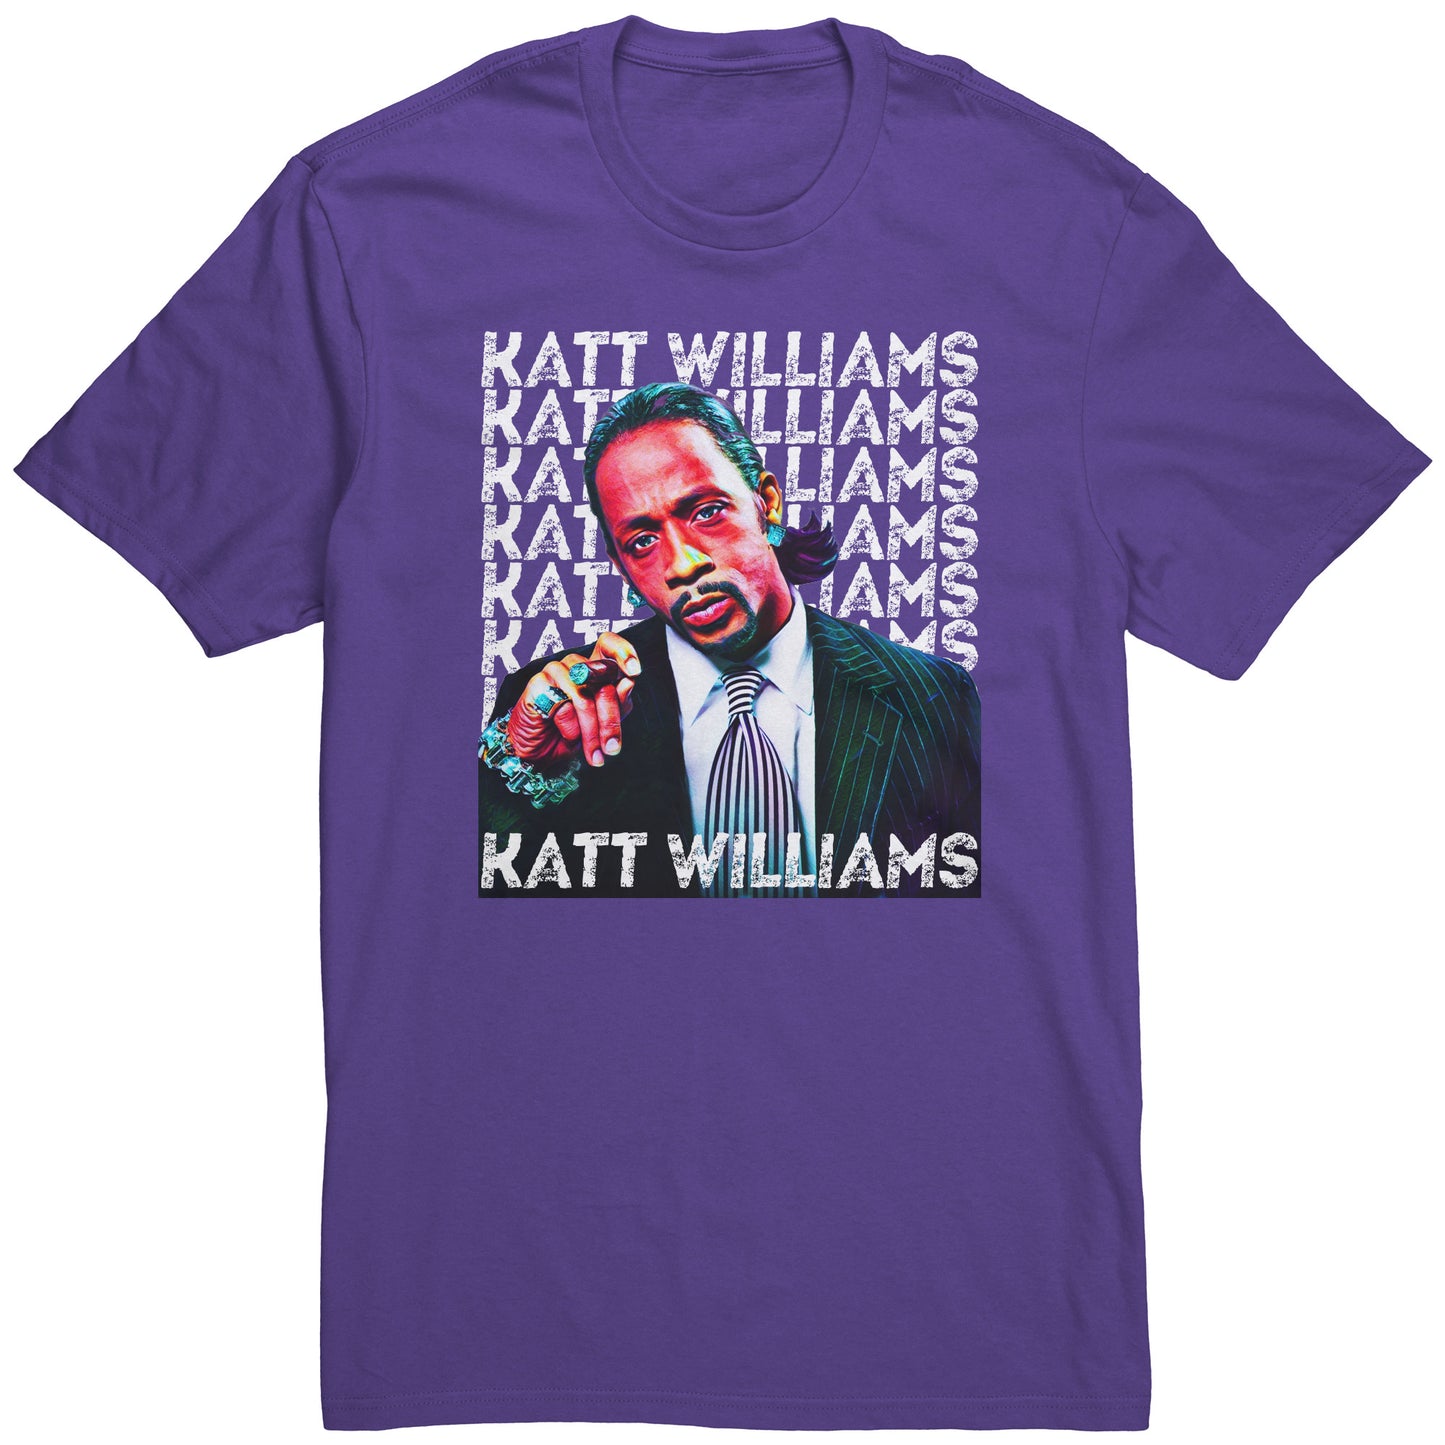 Adult Tee " The Katt Is Out The Bag"